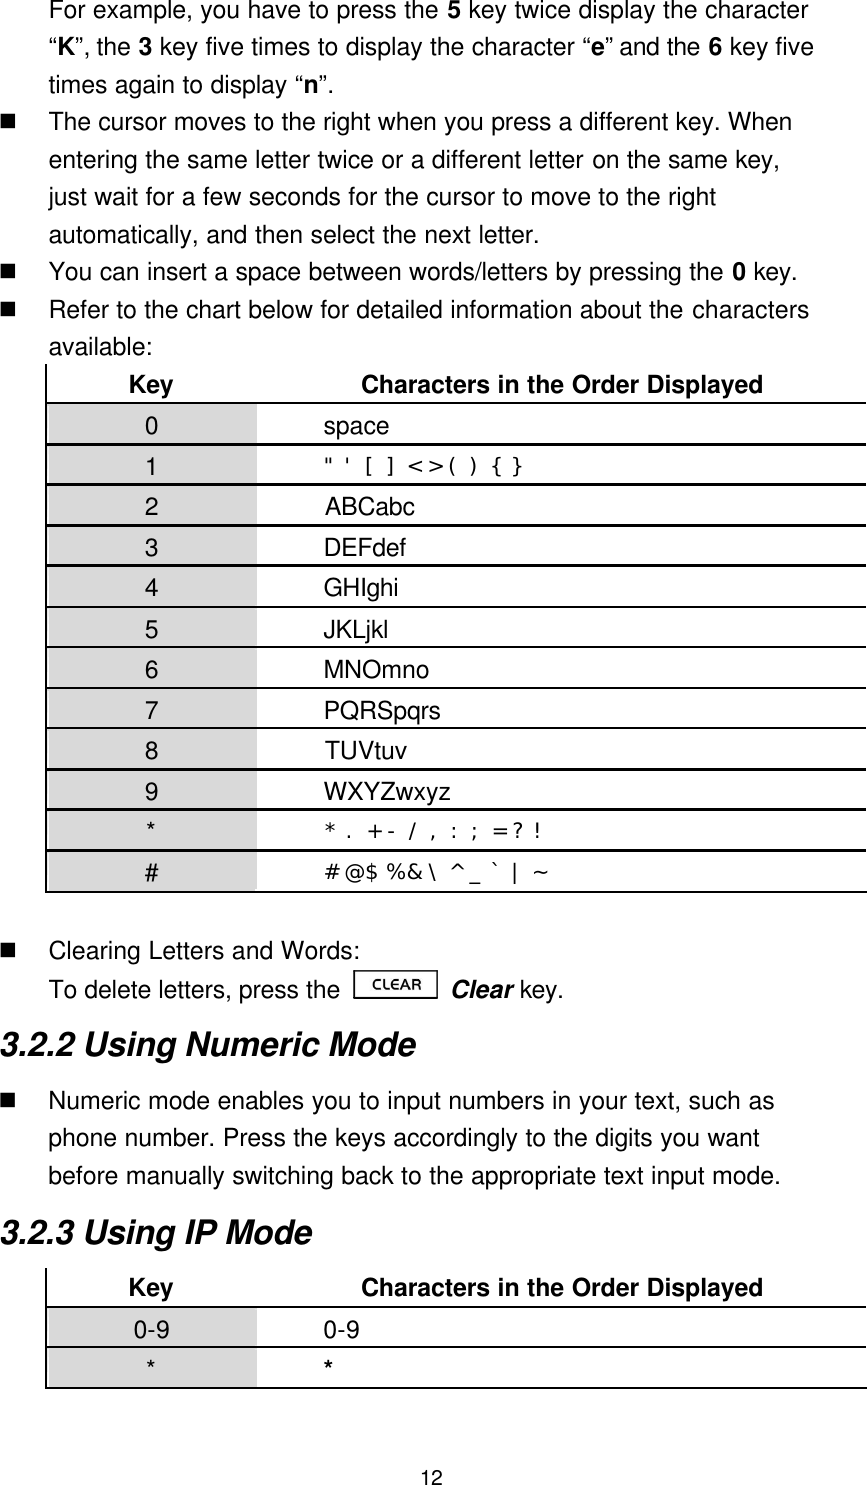  12 For example, you have to press the 5 key twice display the character “K”, the 3 key five times to display the character “e” and the 6 key five times again to display “n”. n The cursor moves to the right when you press a different key. When entering the same letter twice or a different letter on the same key, just wait for a few seconds for the cursor to move to the right automatically, and then select the next letter. n You can insert a space between words/letters by pressing the 0 key. n Refer to the chart below for detailed information about the characters available: Key Characters in the Order Displayed 0      space 1      &quot; &apos; [ ] &lt; &gt; ( ) { } 2      ABCabc 3      DEFdef 4      GHIghi 5      JKLjkl 6      MNOmno 7      PQRSpqrs 8      TUVtuv 9 WXYZwxyz * * . + - / , : ; = ? ! # # @ $ % &amp; \ ^ _ ` | ~  n Clearing Letters and Words: To delete letters, press the   Clear key. 3.2.2 Using Numeric Mode n Numeric mode enables you to input numbers in your text, such as phone number. Press the keys accordingly to the digits you want before manually switching back to the appropriate text input mode. 3.2.3 Using IP Mode Key Characters in the Order Displayed 0-9      0-9 *      *  